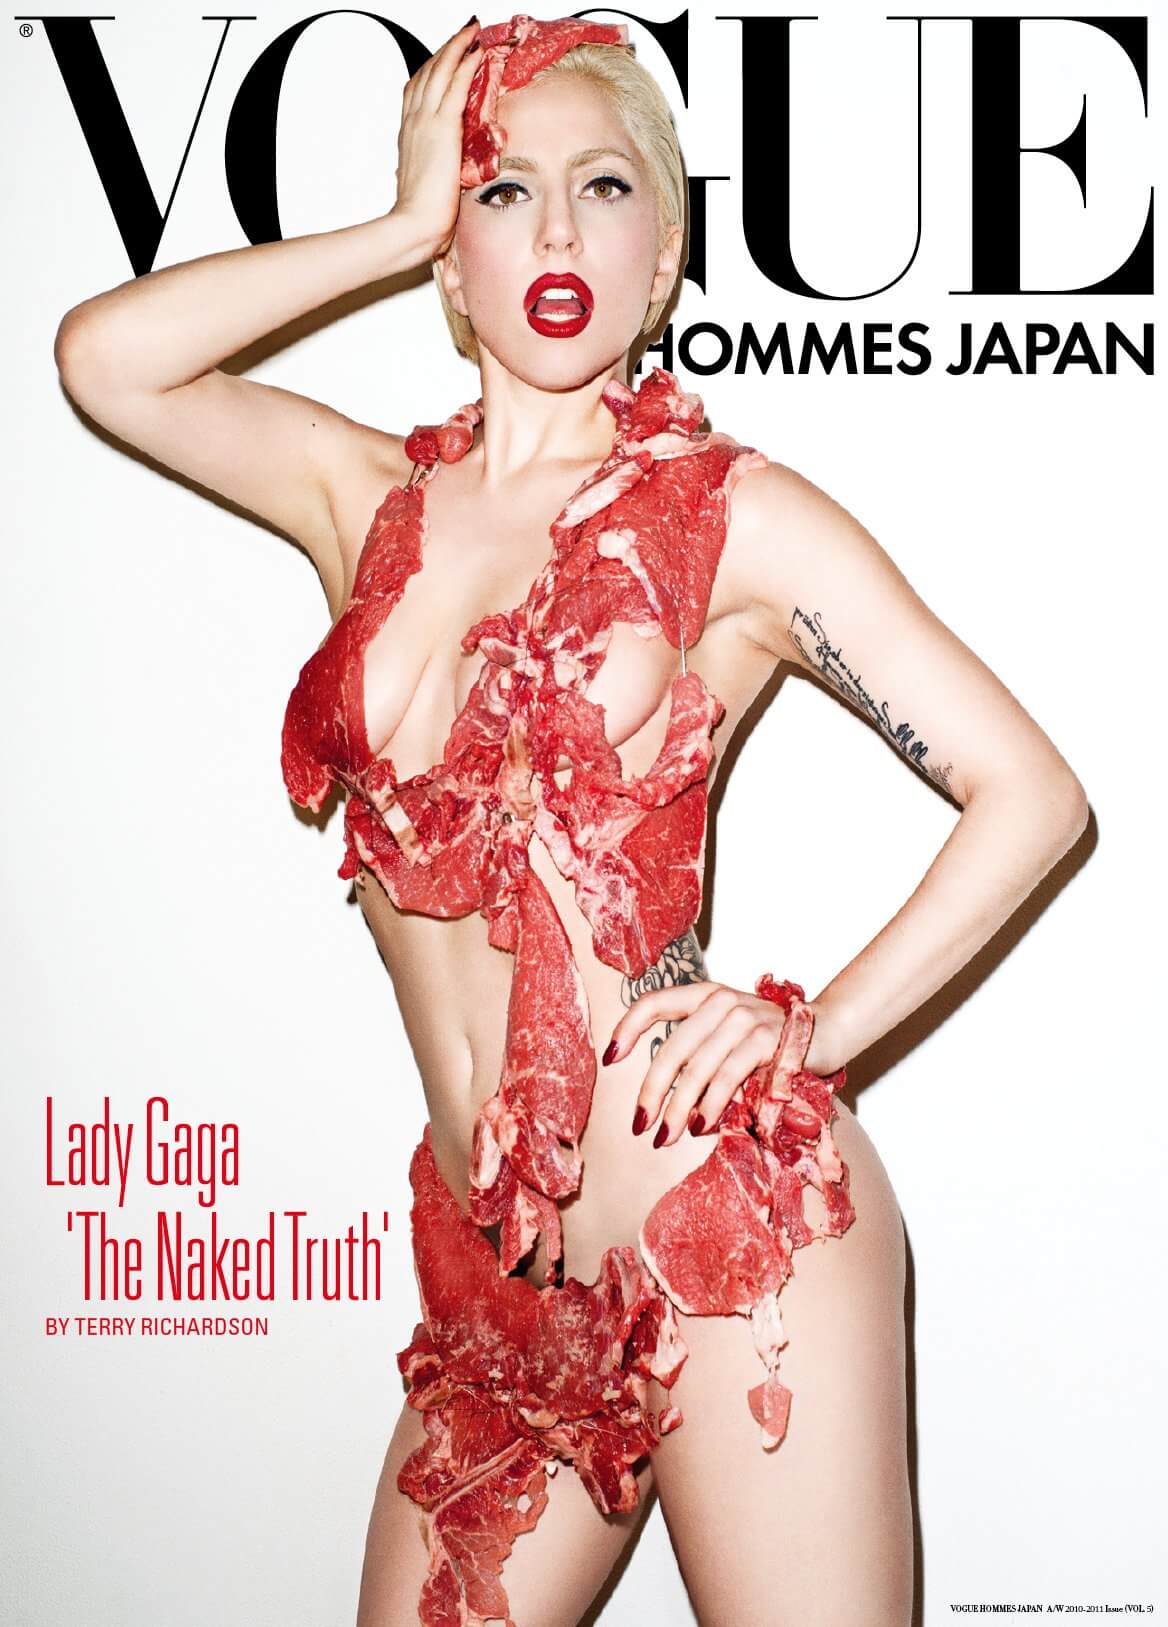 Lady Gaga's Meat Dress Cover for Vogue Hommes Japan (Fall/Winter 2010)